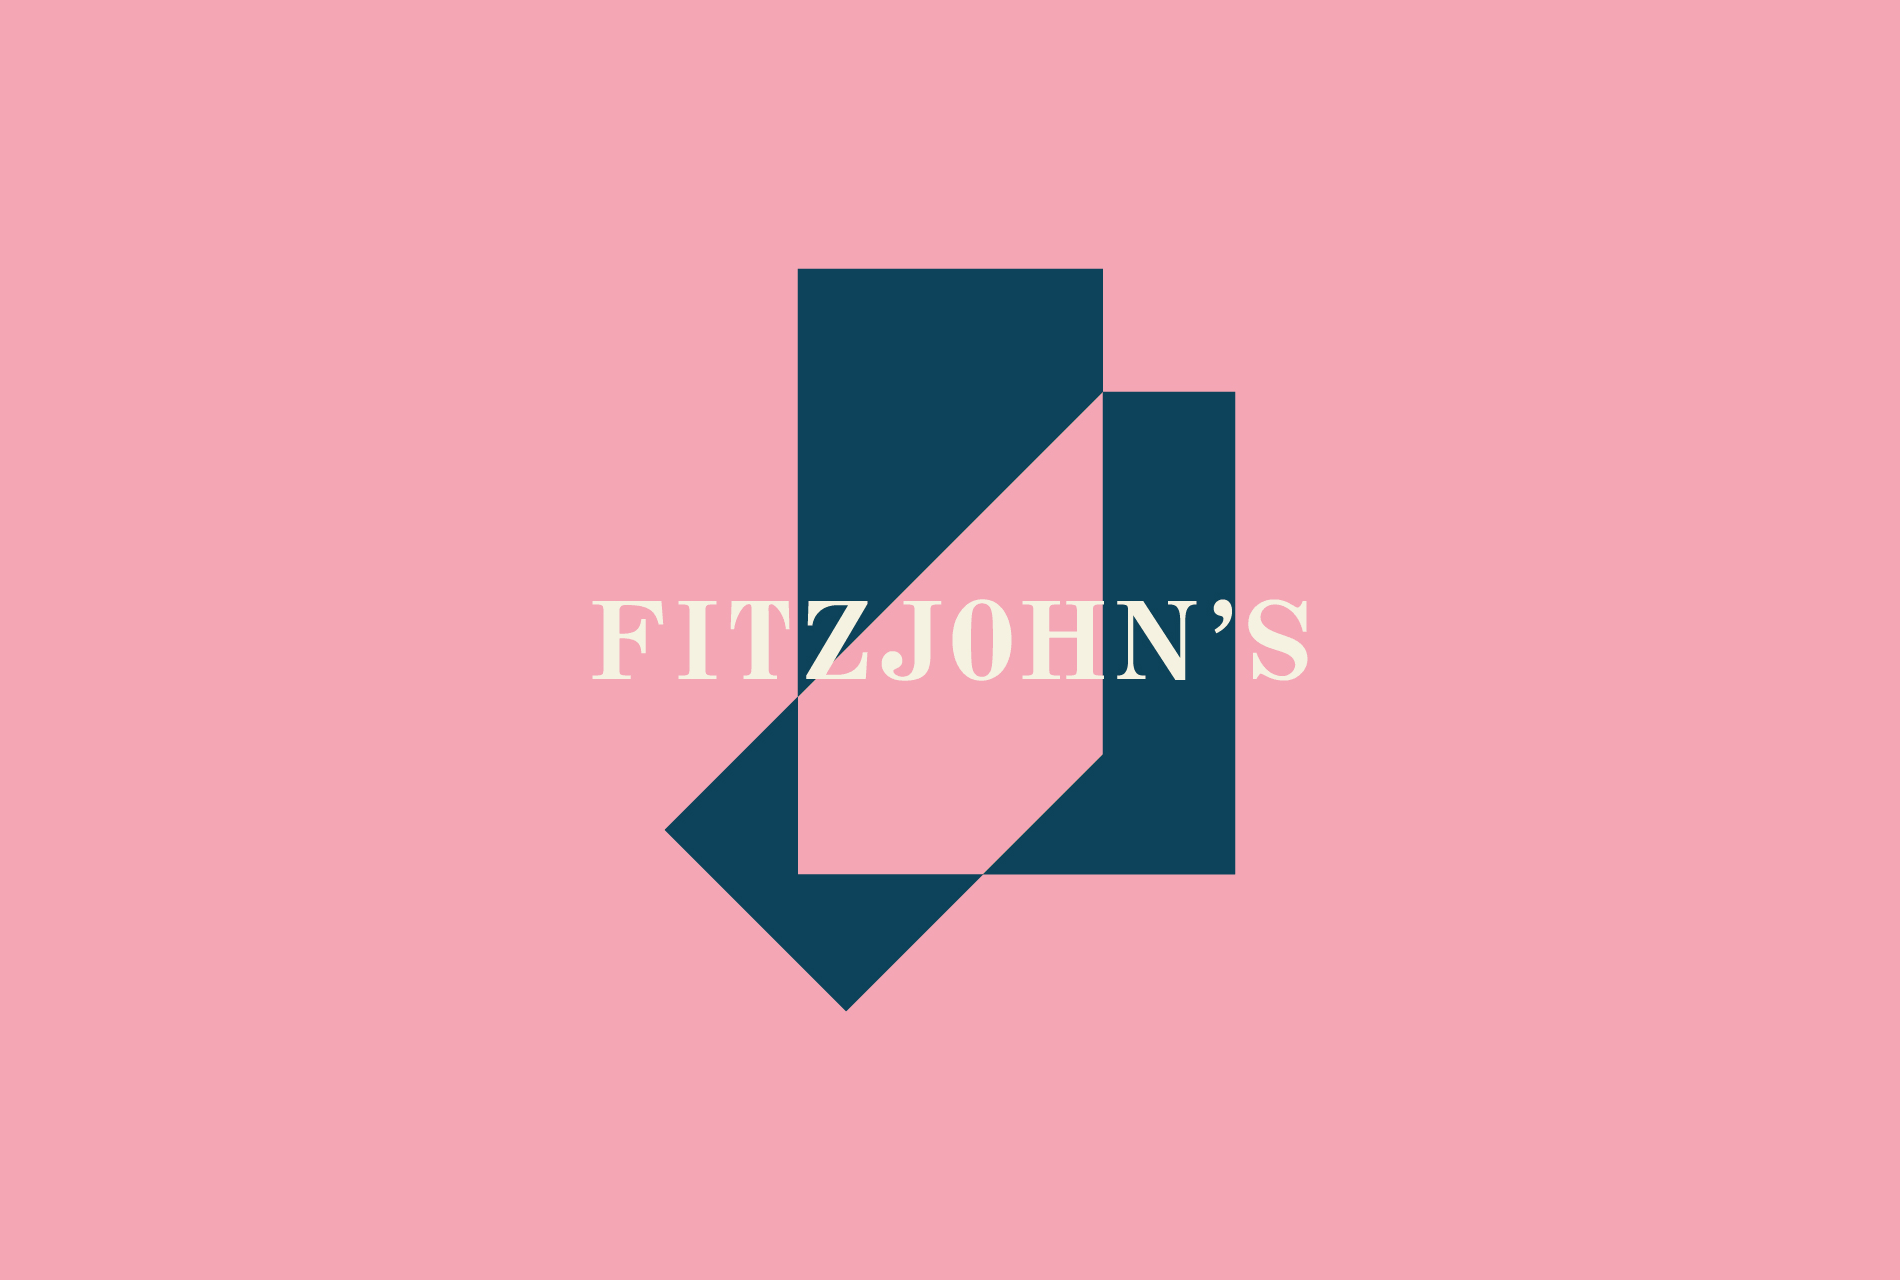 New visual identity for Hampstead property development Fitzjohn's designed by DutchScot.